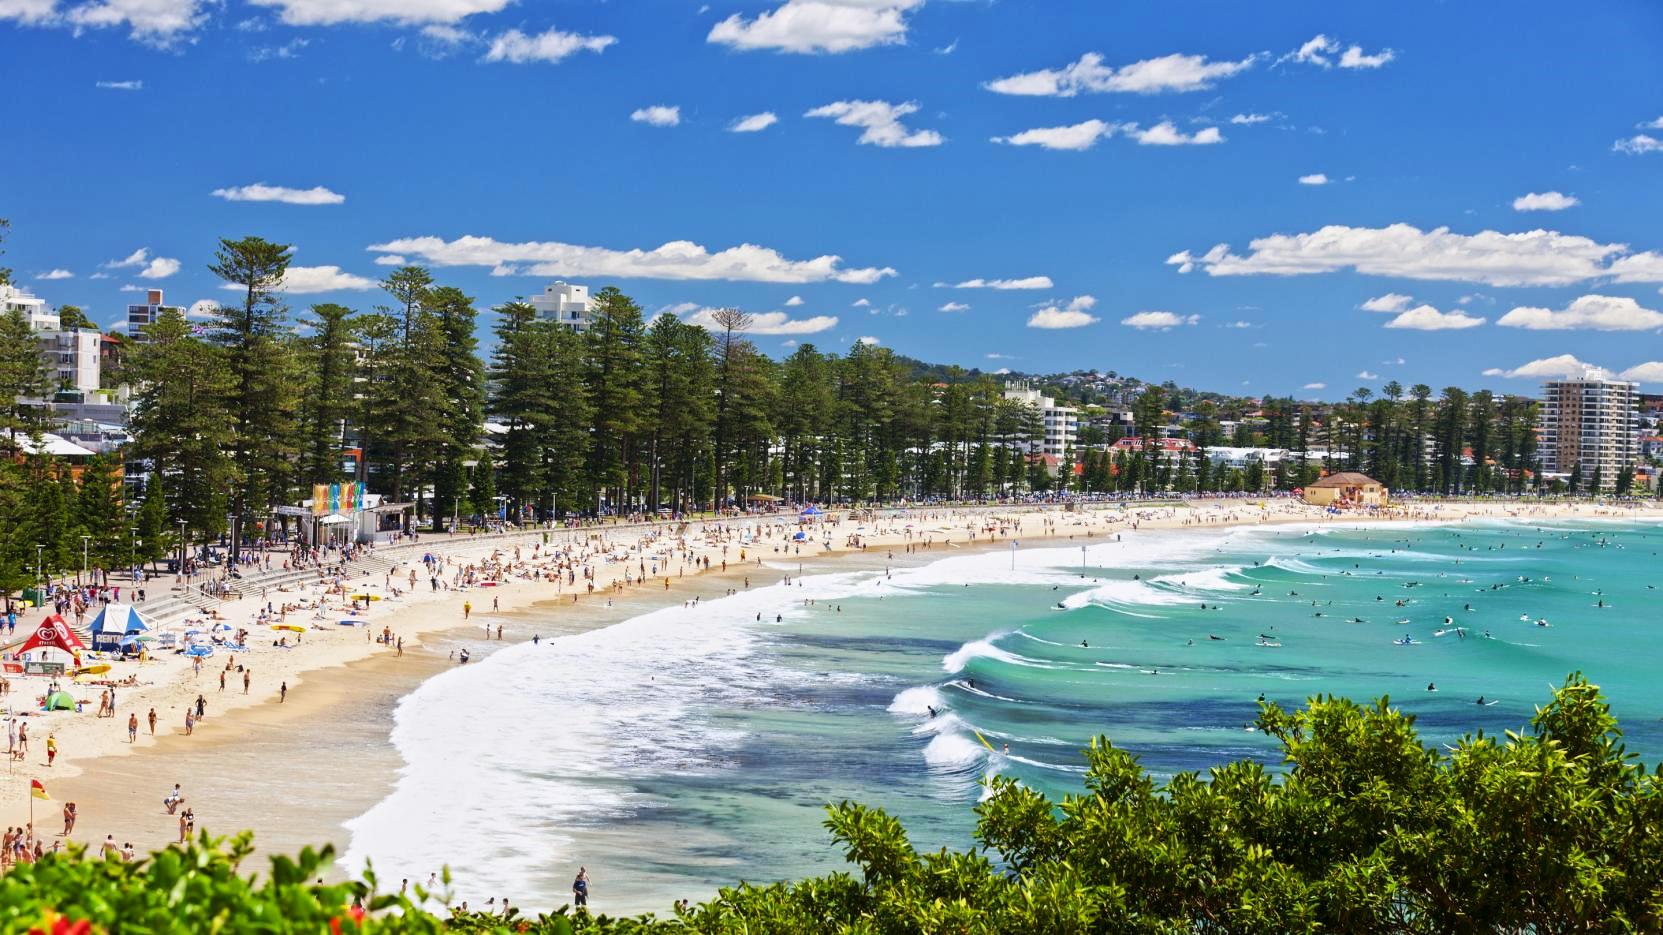 Sydney's Stunning Northern Beaches Private Tour with a River Boat Ride to Secluded Beaches